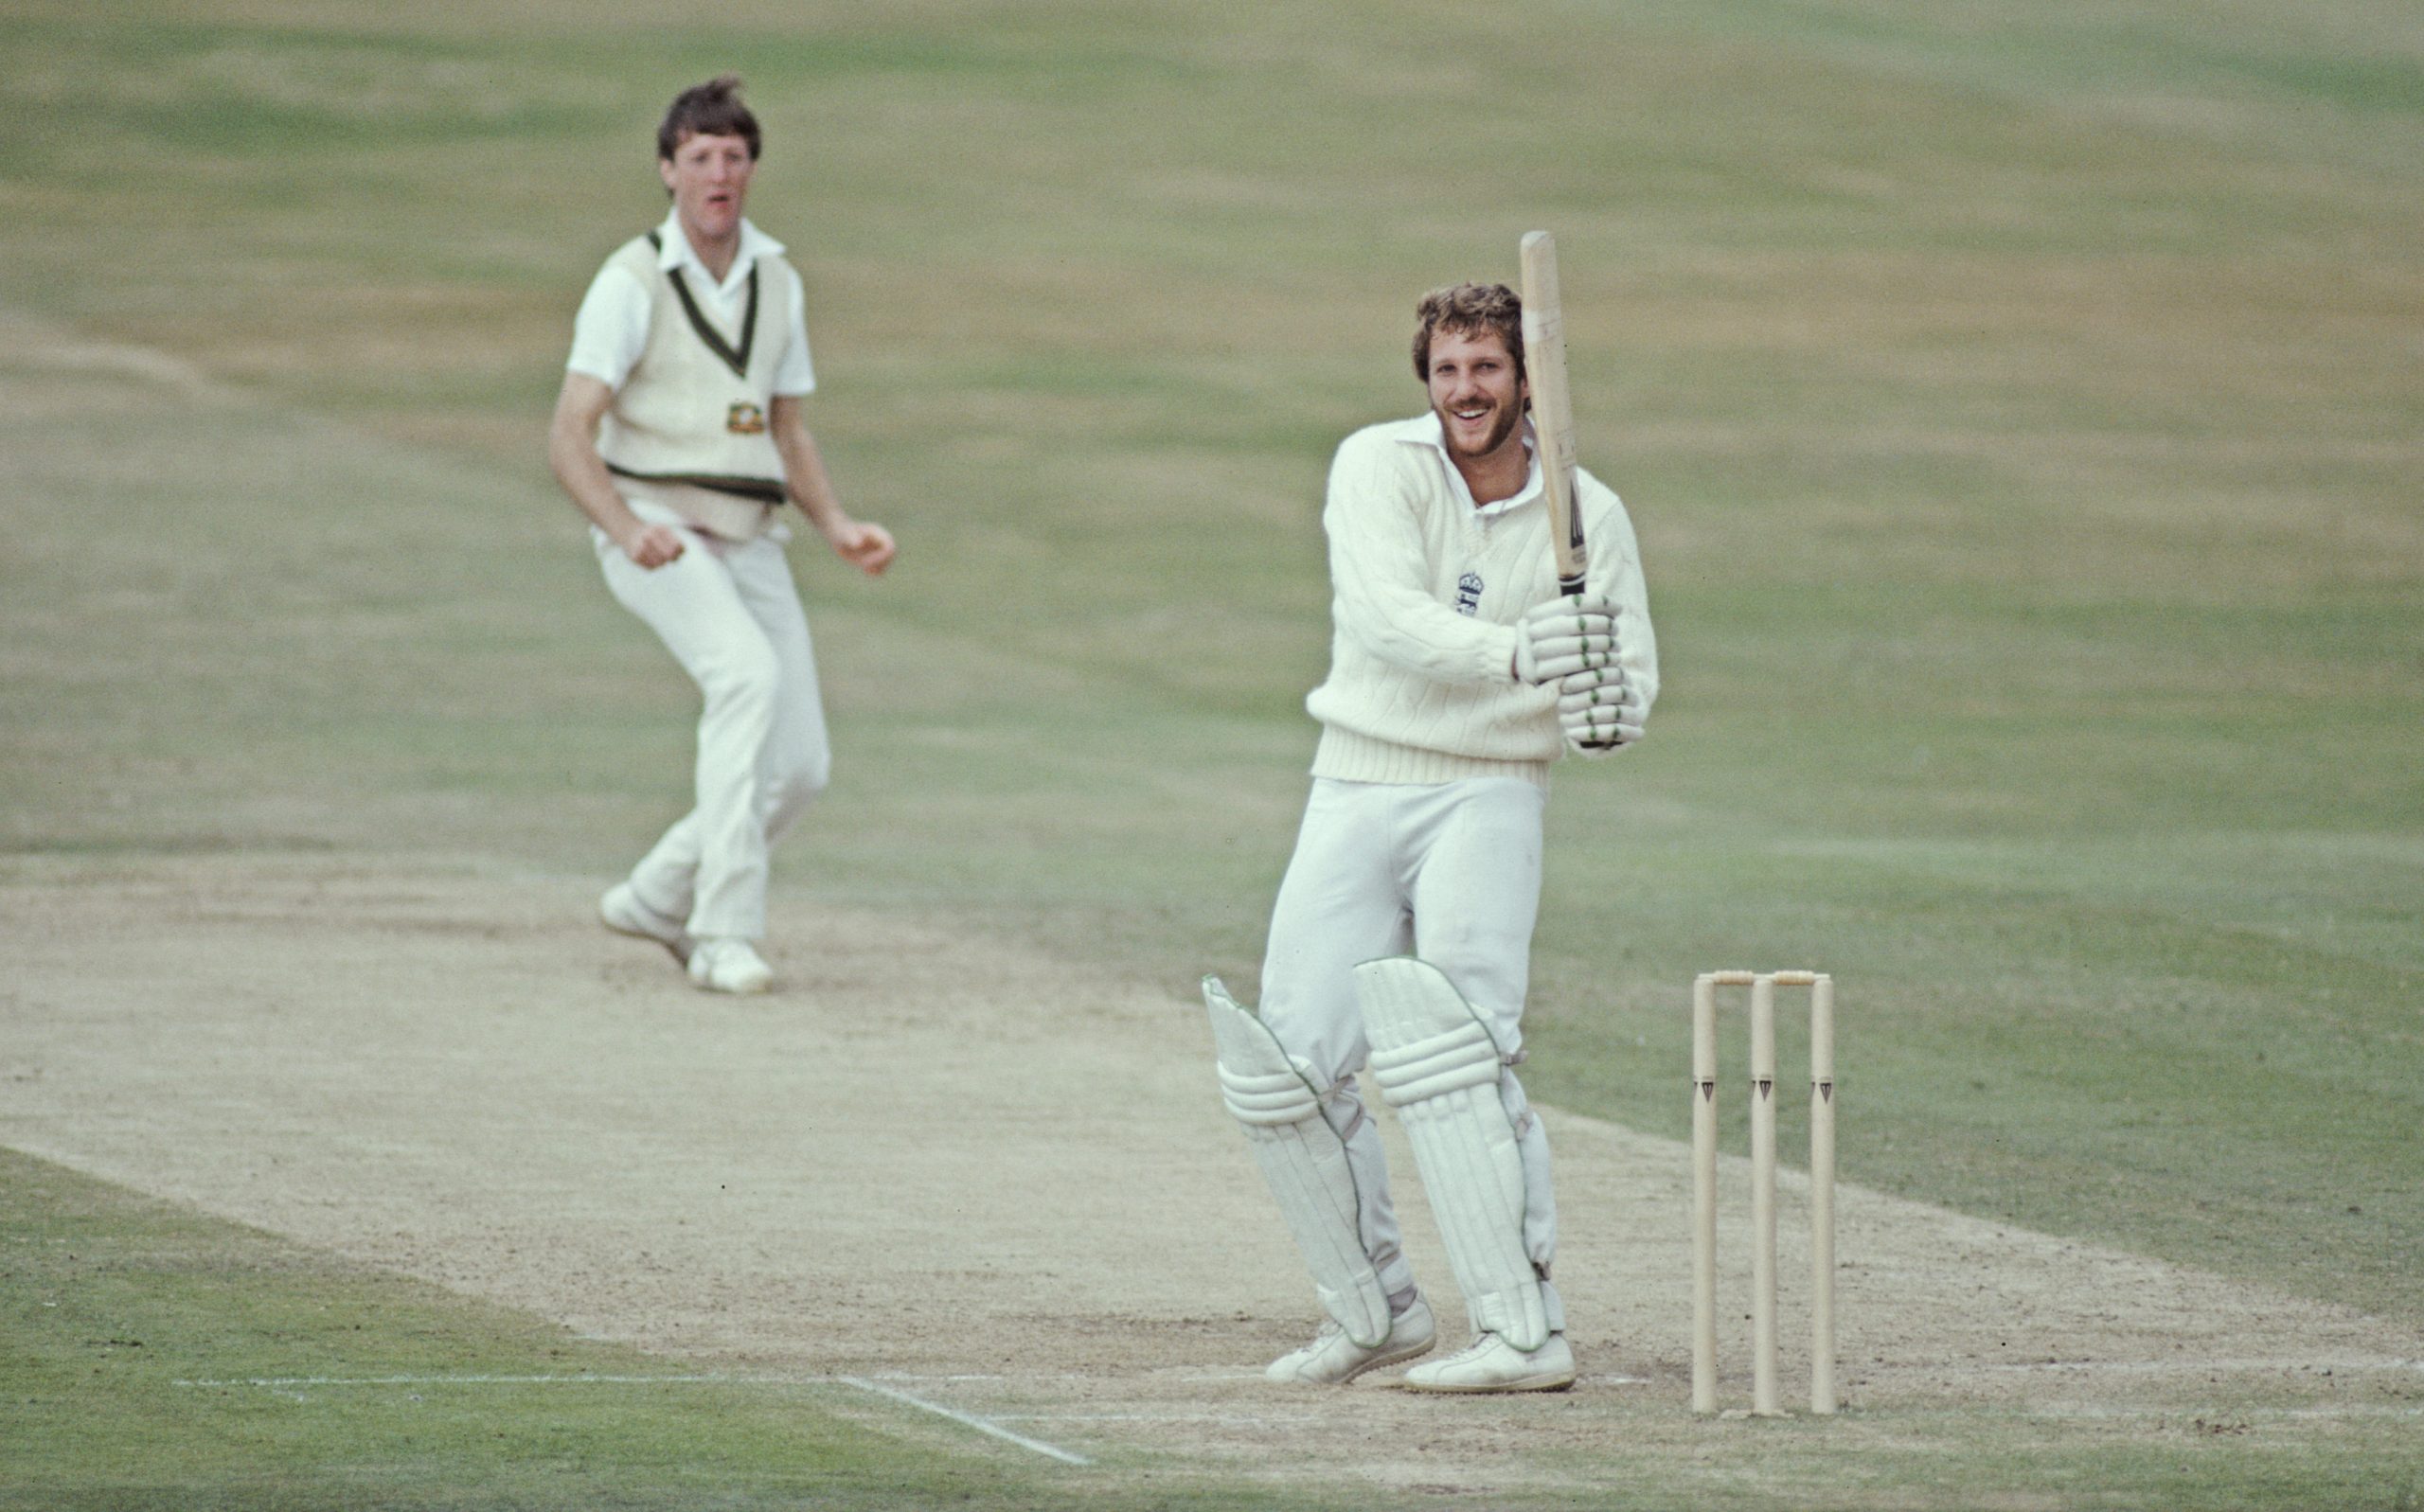 Ian Botham hits out at the bowling of Geoff Lawson during his 149* in the second innings of the third Ashes Test in 1981.